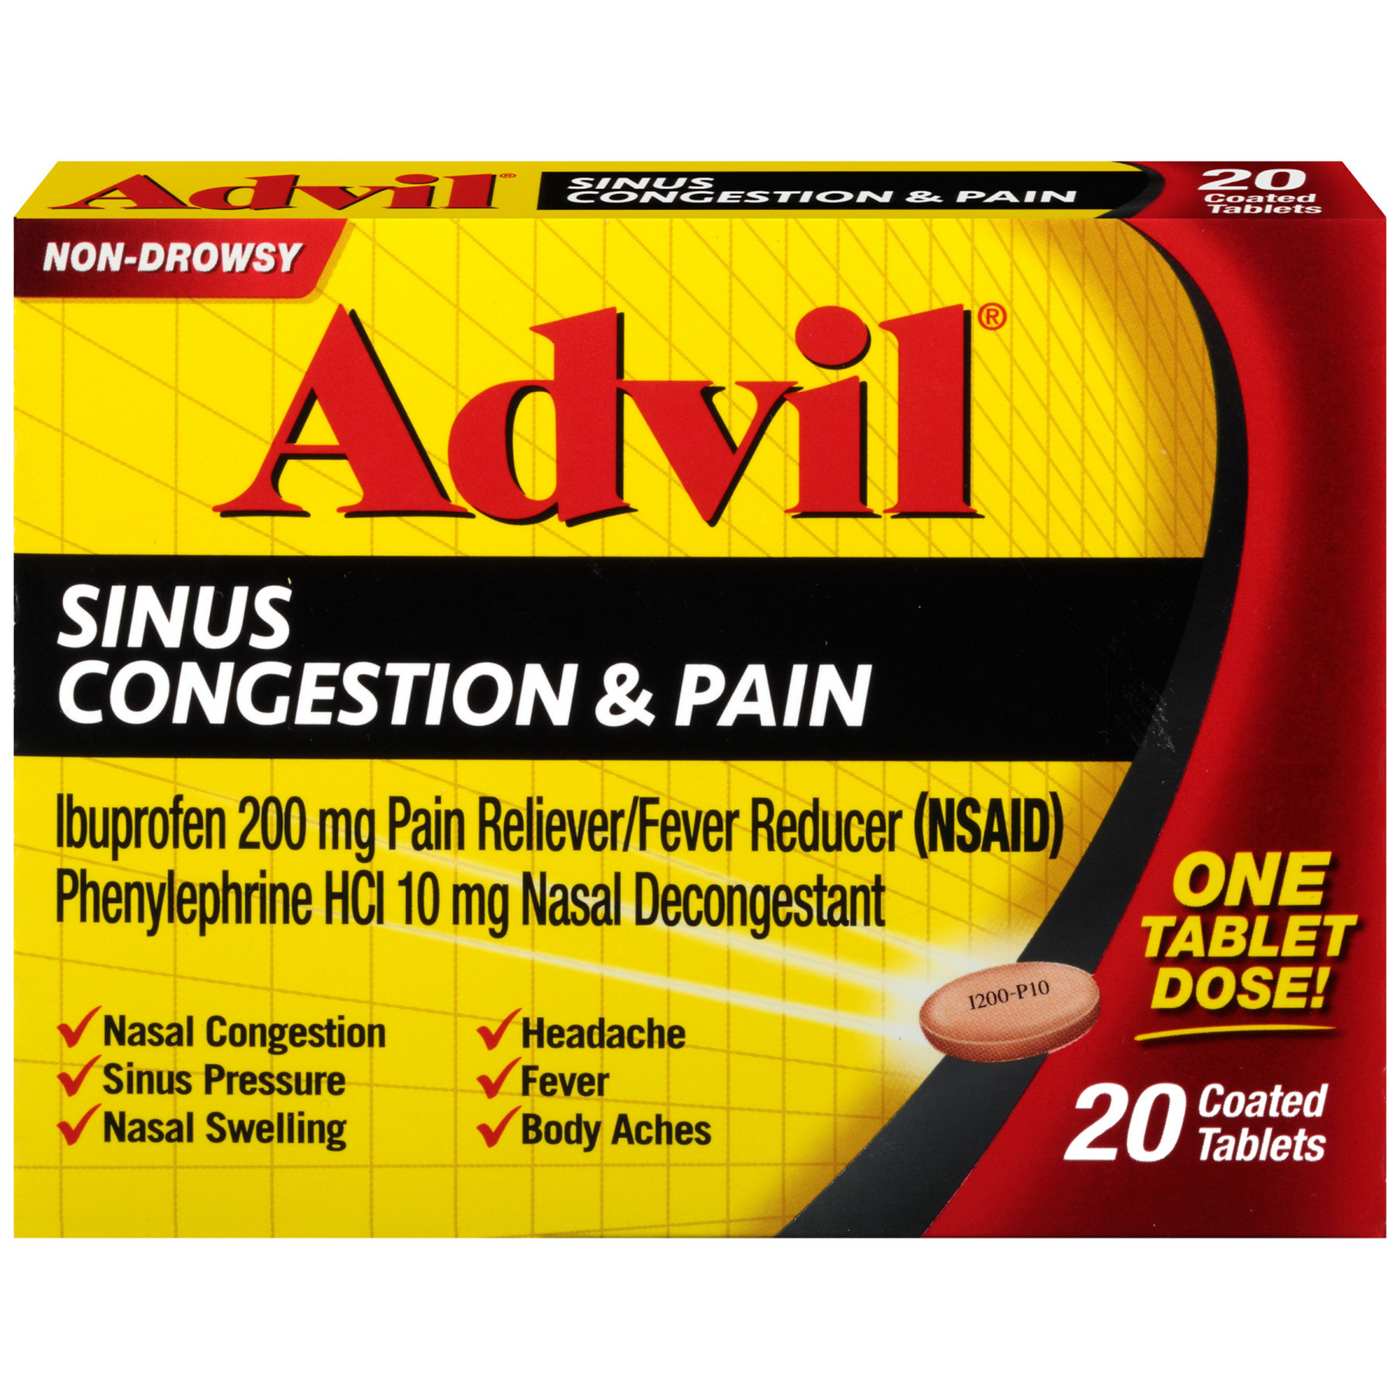 Advil Sinus Congestion and Pain Relief; image 2 of 8